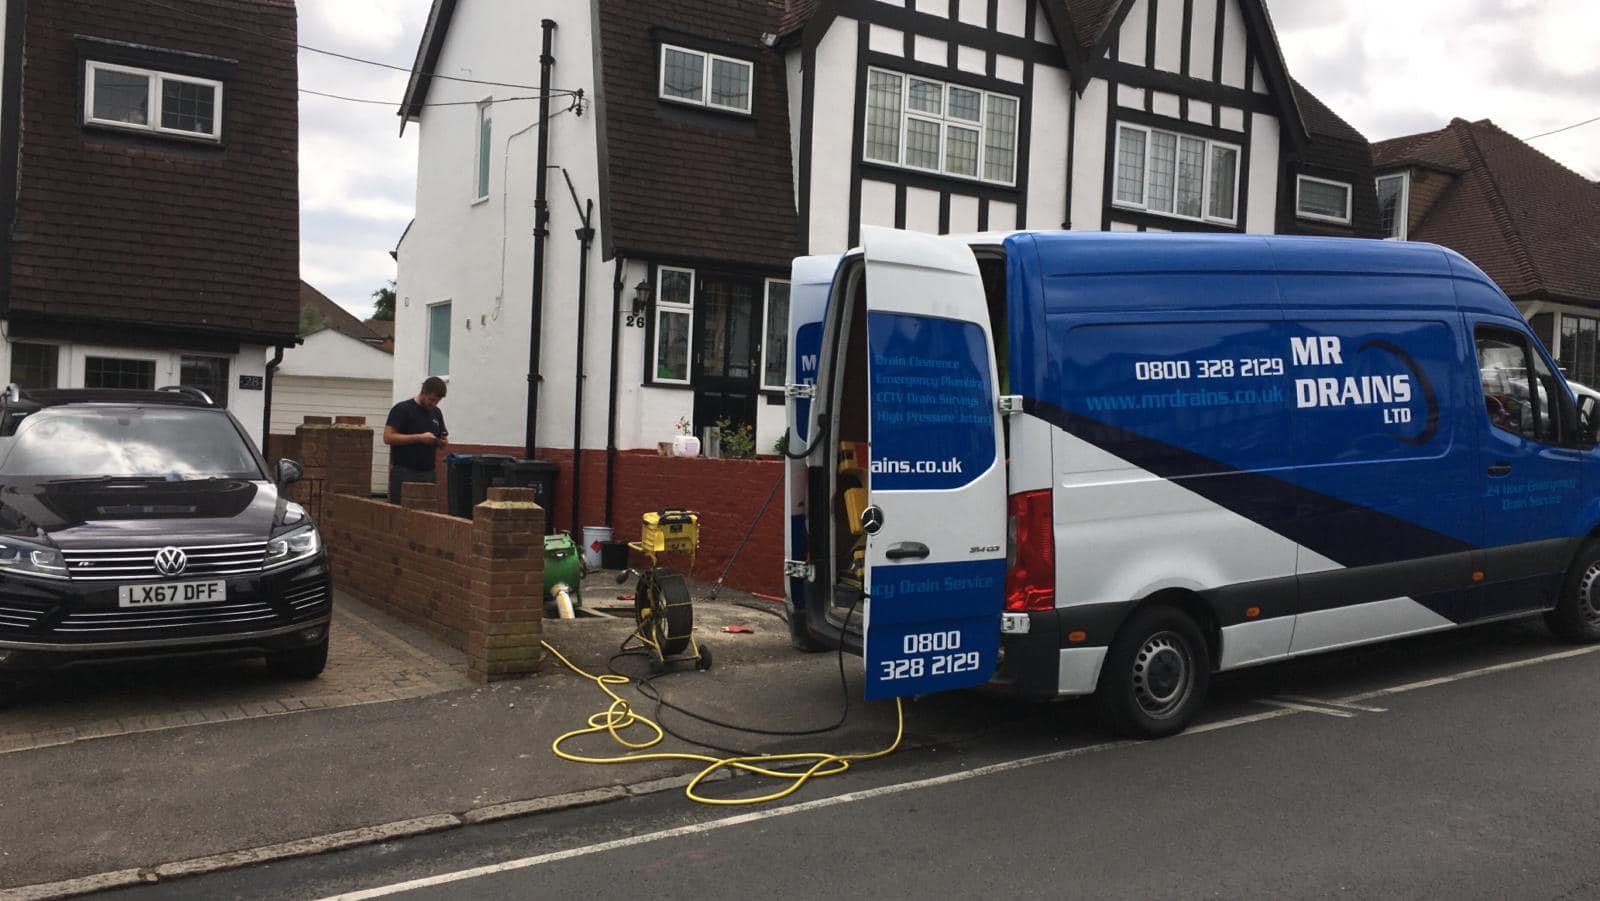 Drain Clearance & Services UK